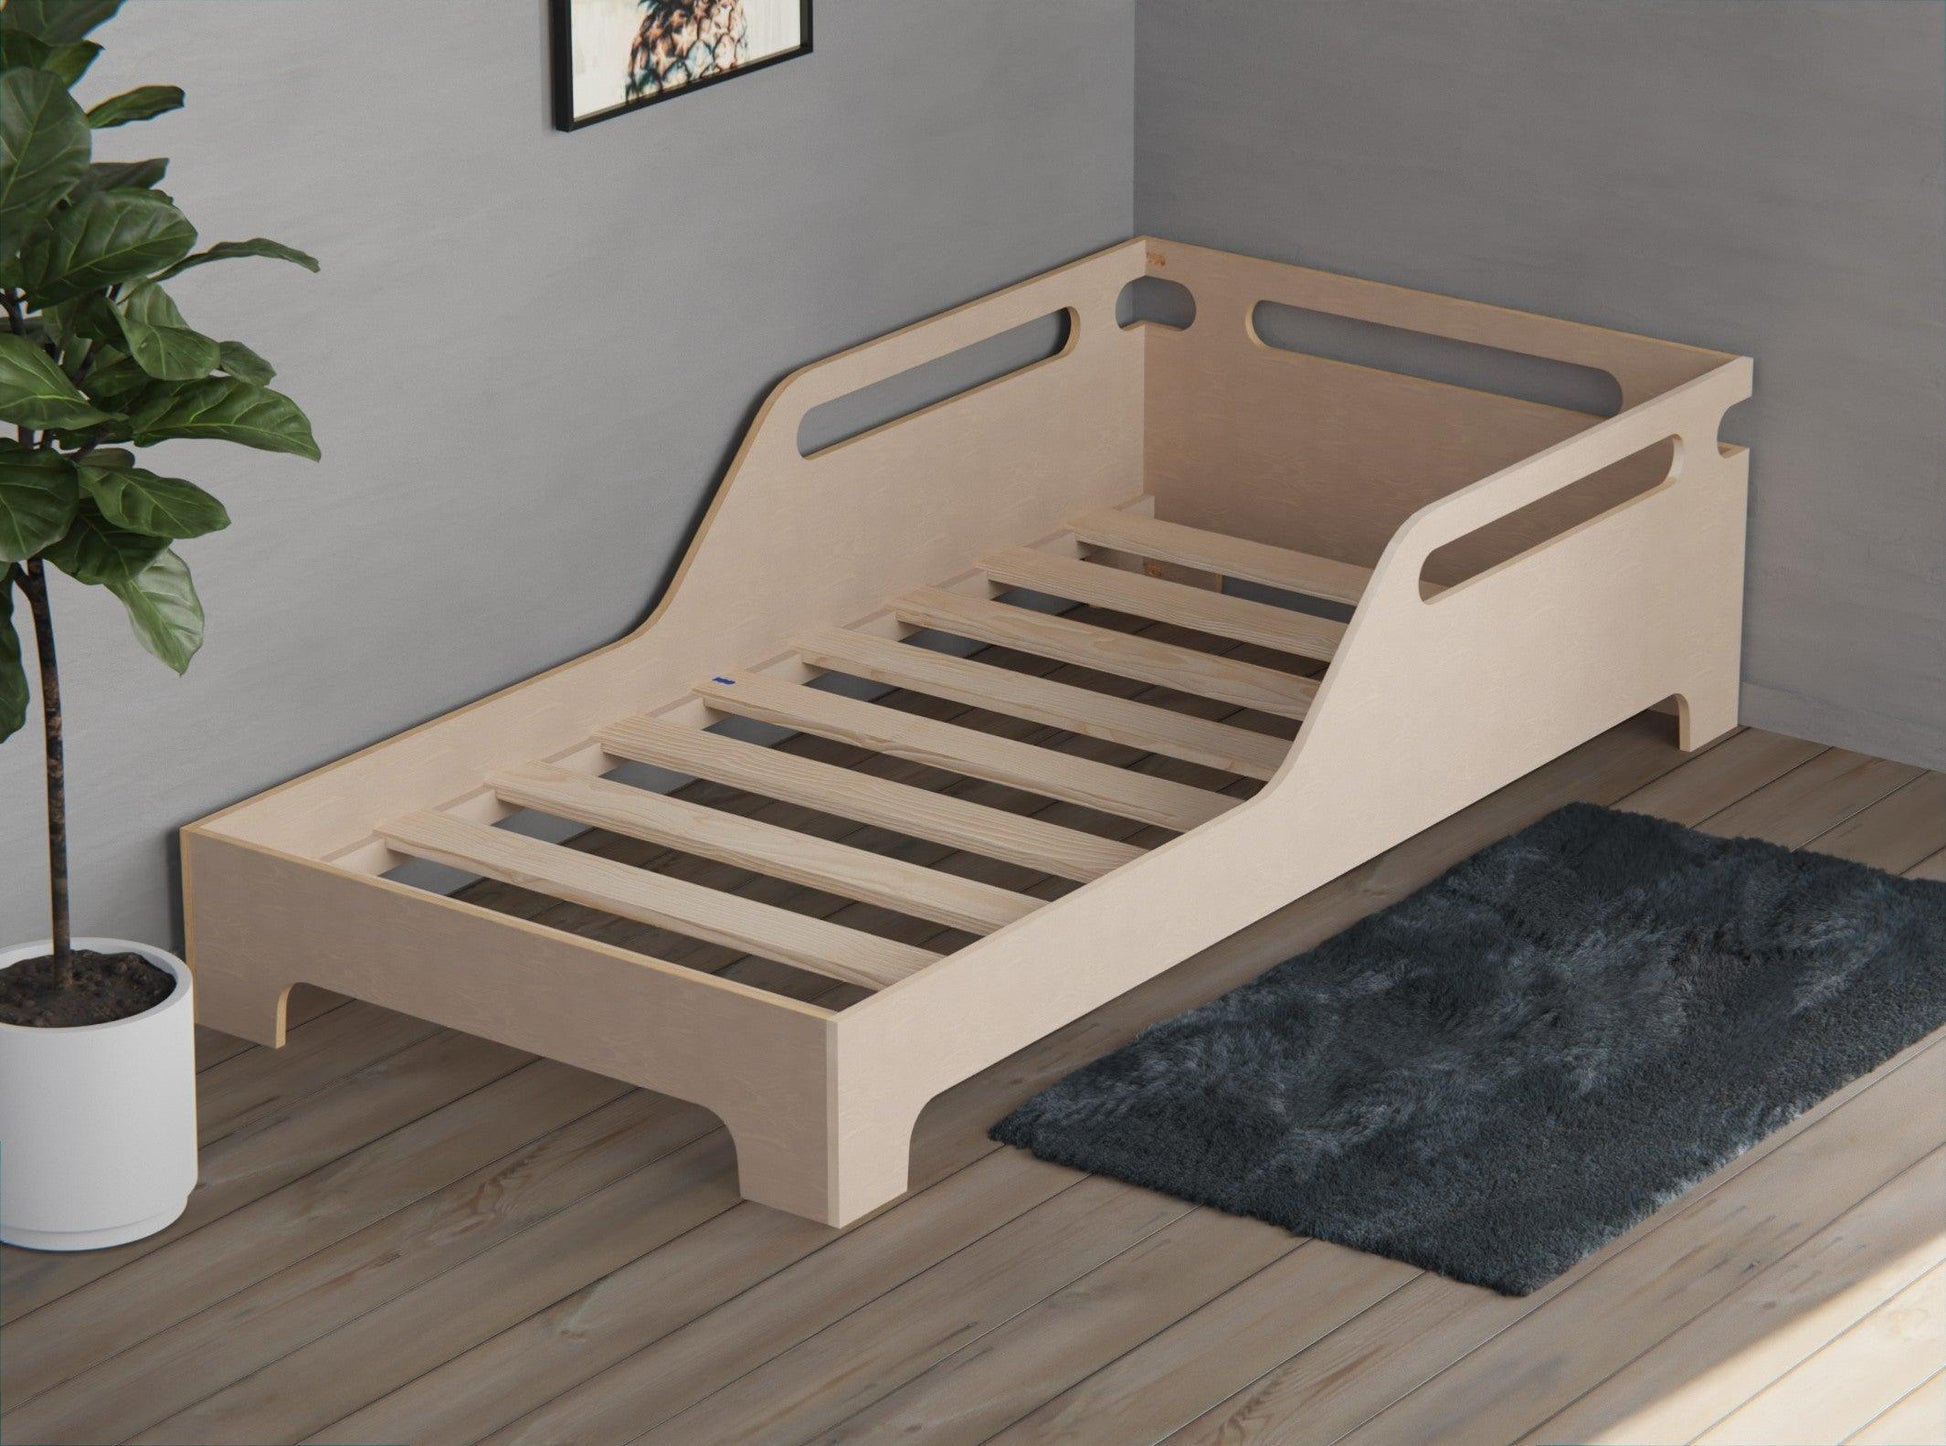 Low children's bed frame from plywood.